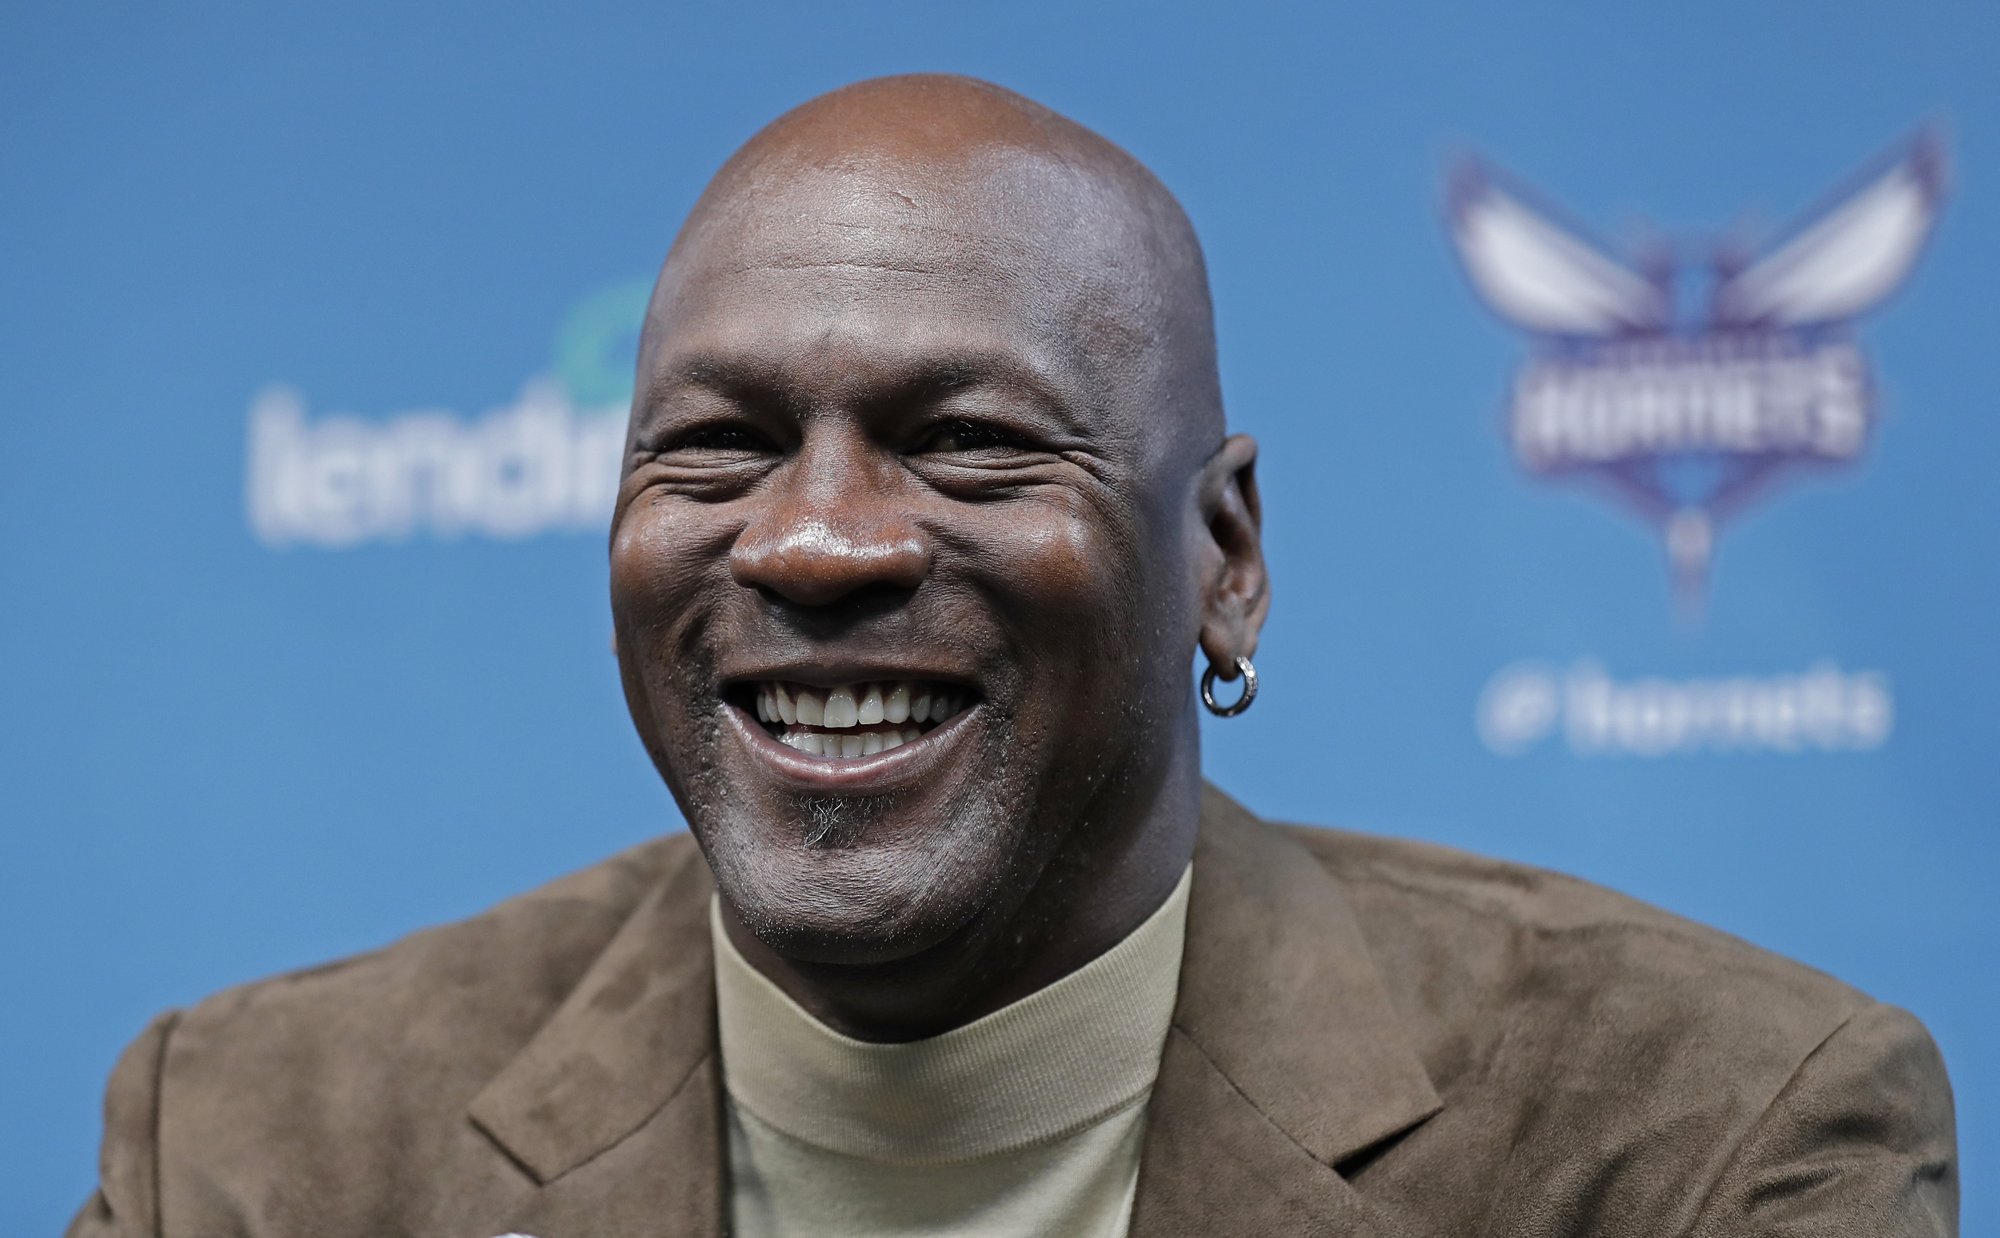 Charlotte Hornets owner Michael Jordan speaks to the media about hosting the NBA All-Star basketball game during a news conference in Charlotte, N.C., Tuesday, Feb. 12, 2019. (AP Photo/Chuck Burton)